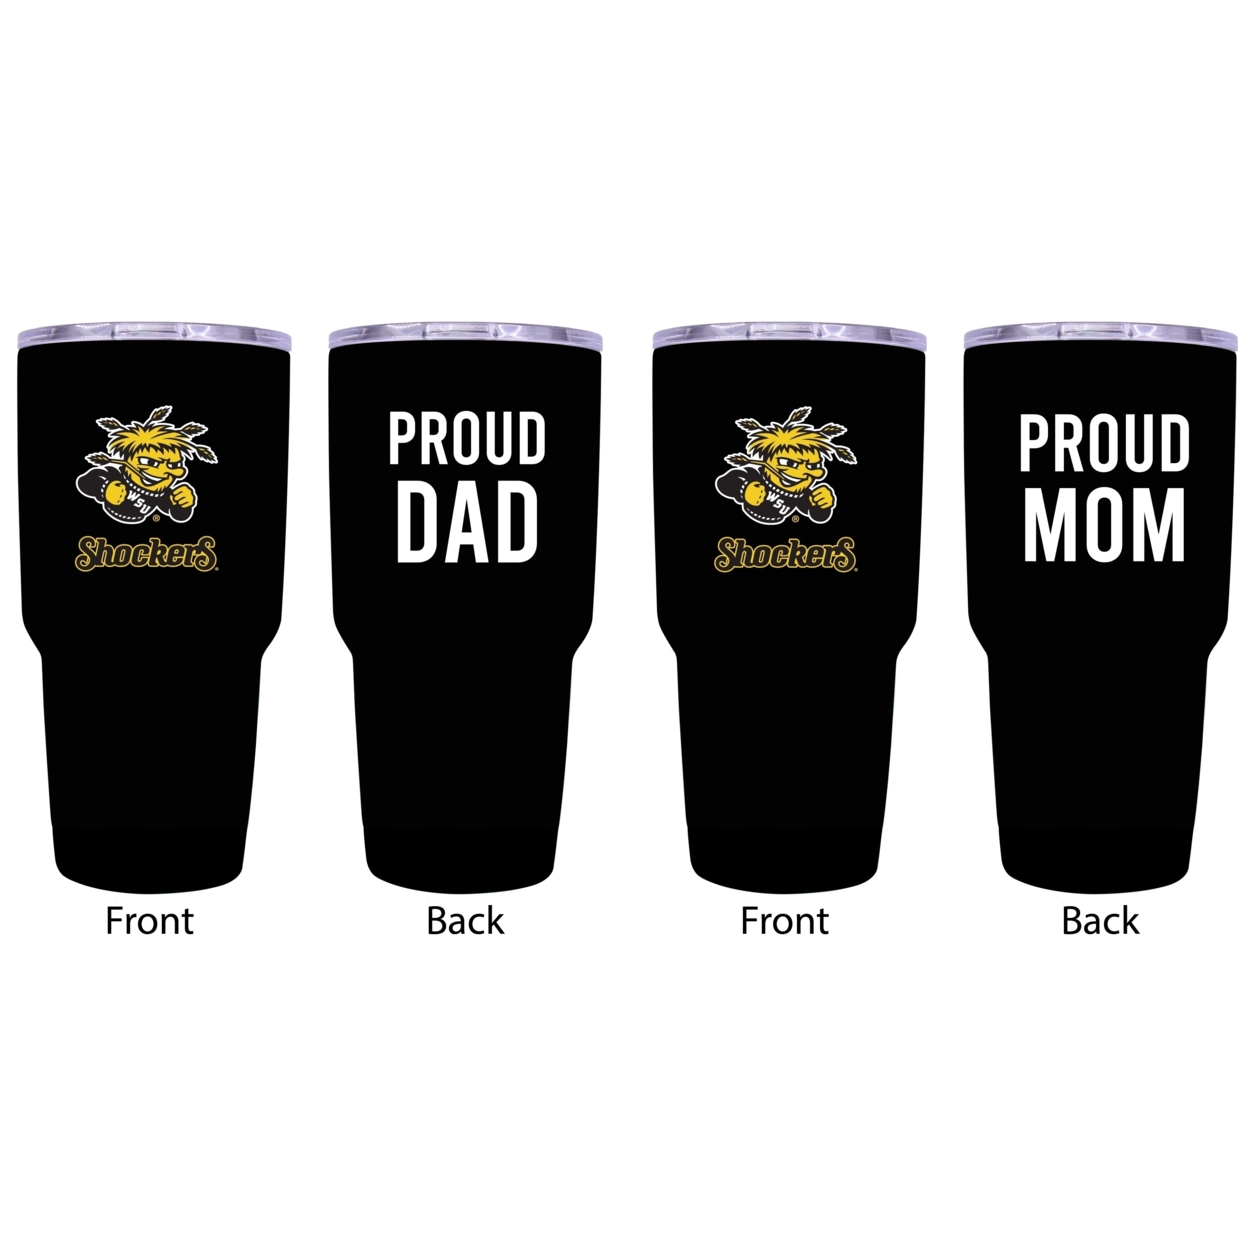 Wichita State Shockers Proud Mom And Dad 24 Oz Insulated Stainless Steel Tumblers 2 Pack Black.